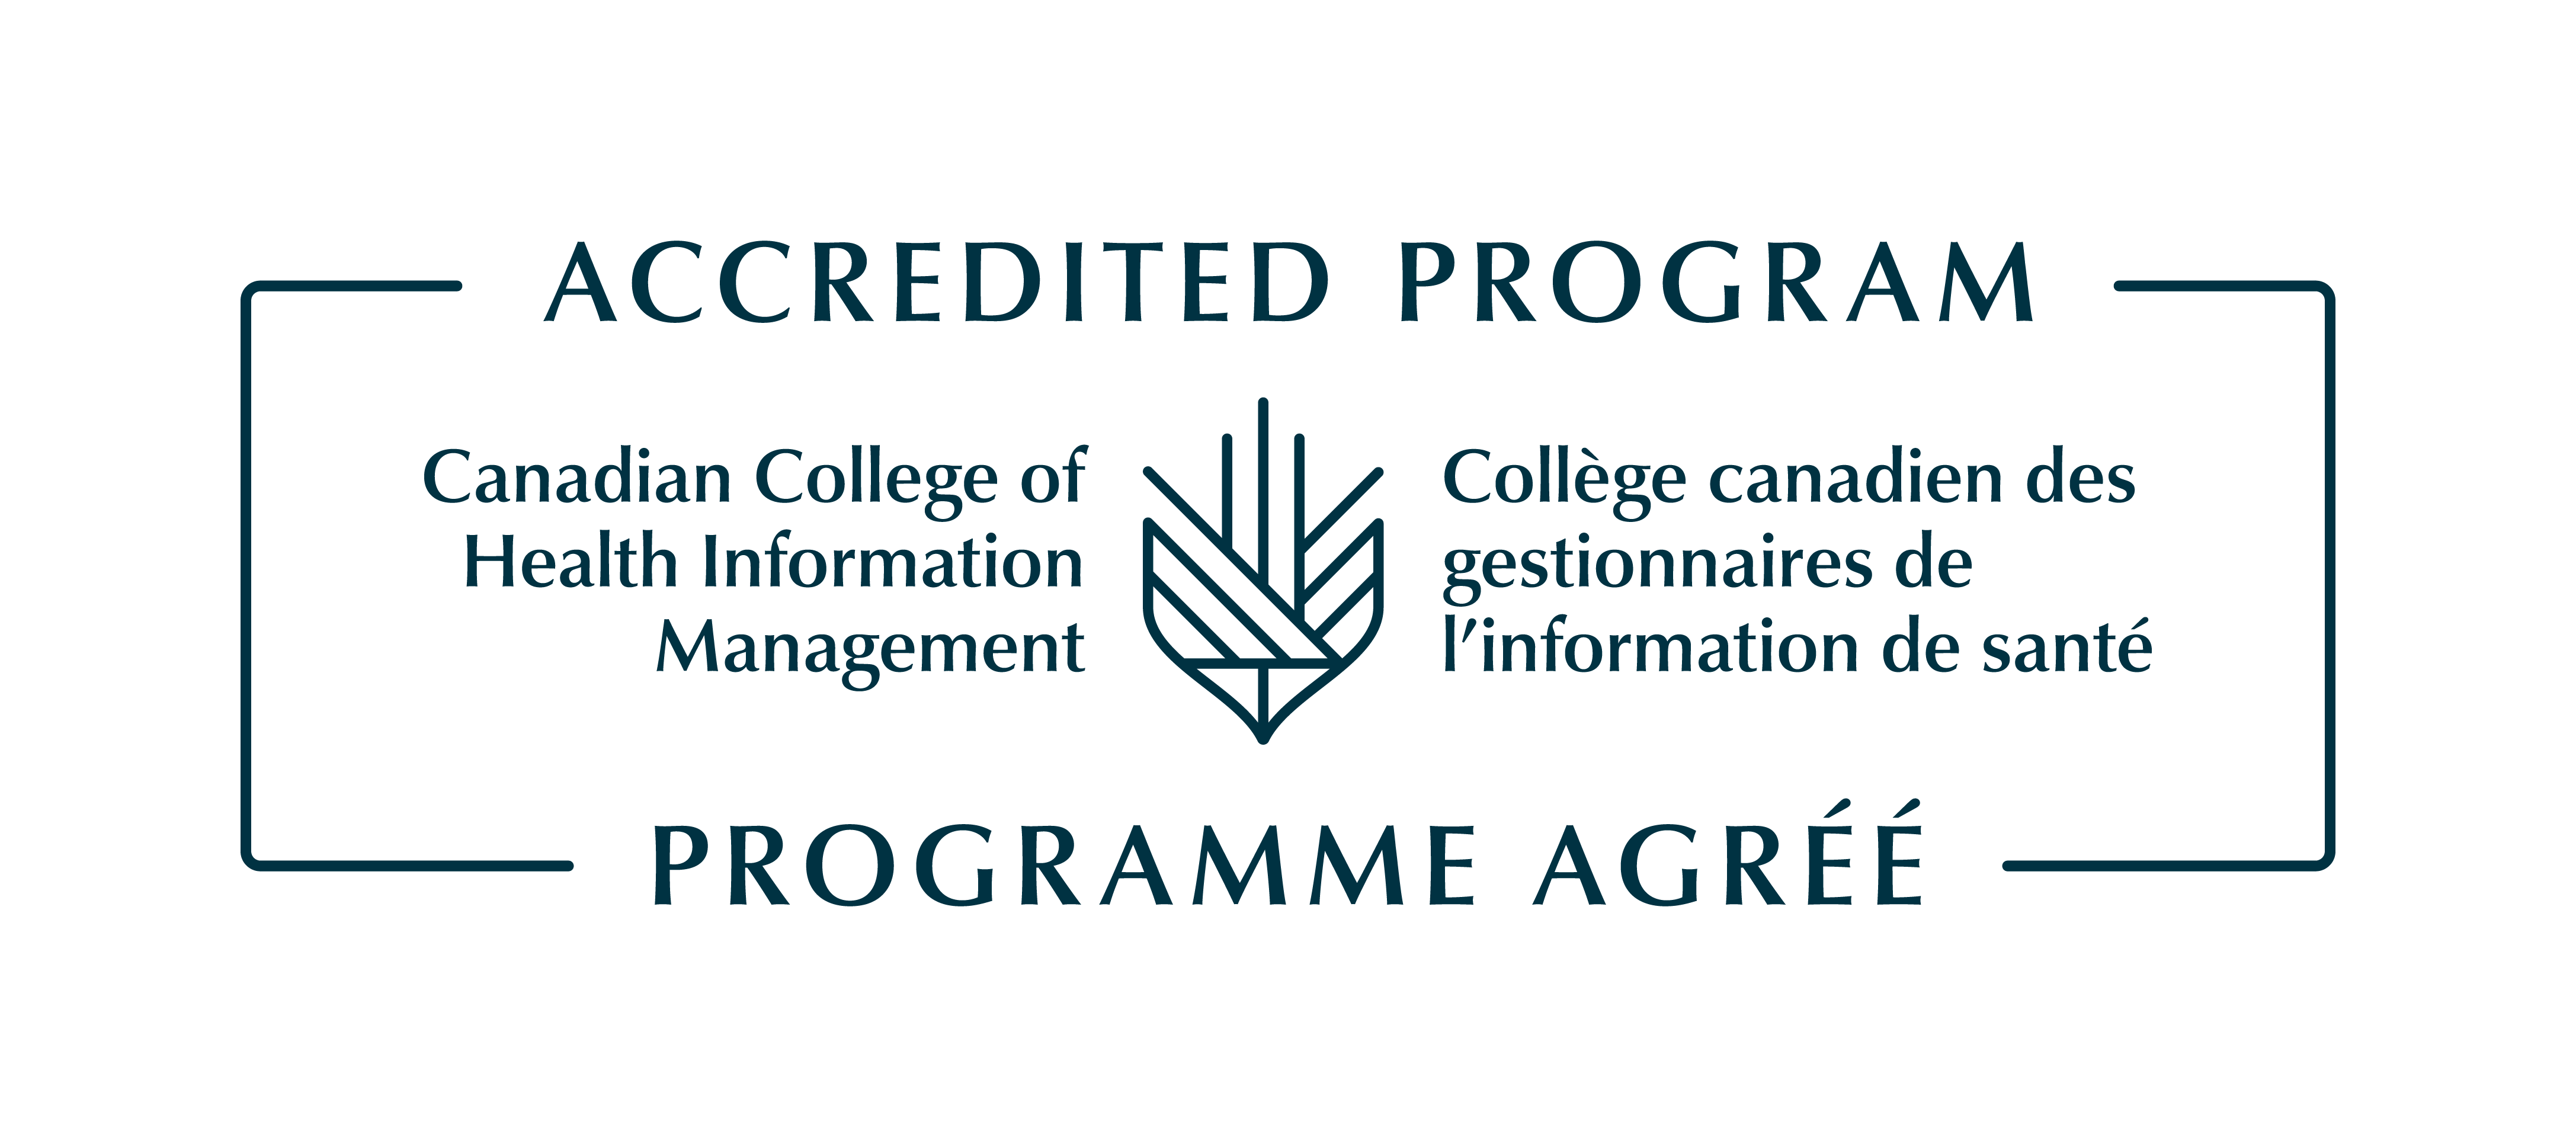 Canadian College of Health Information Management Accreditation logo